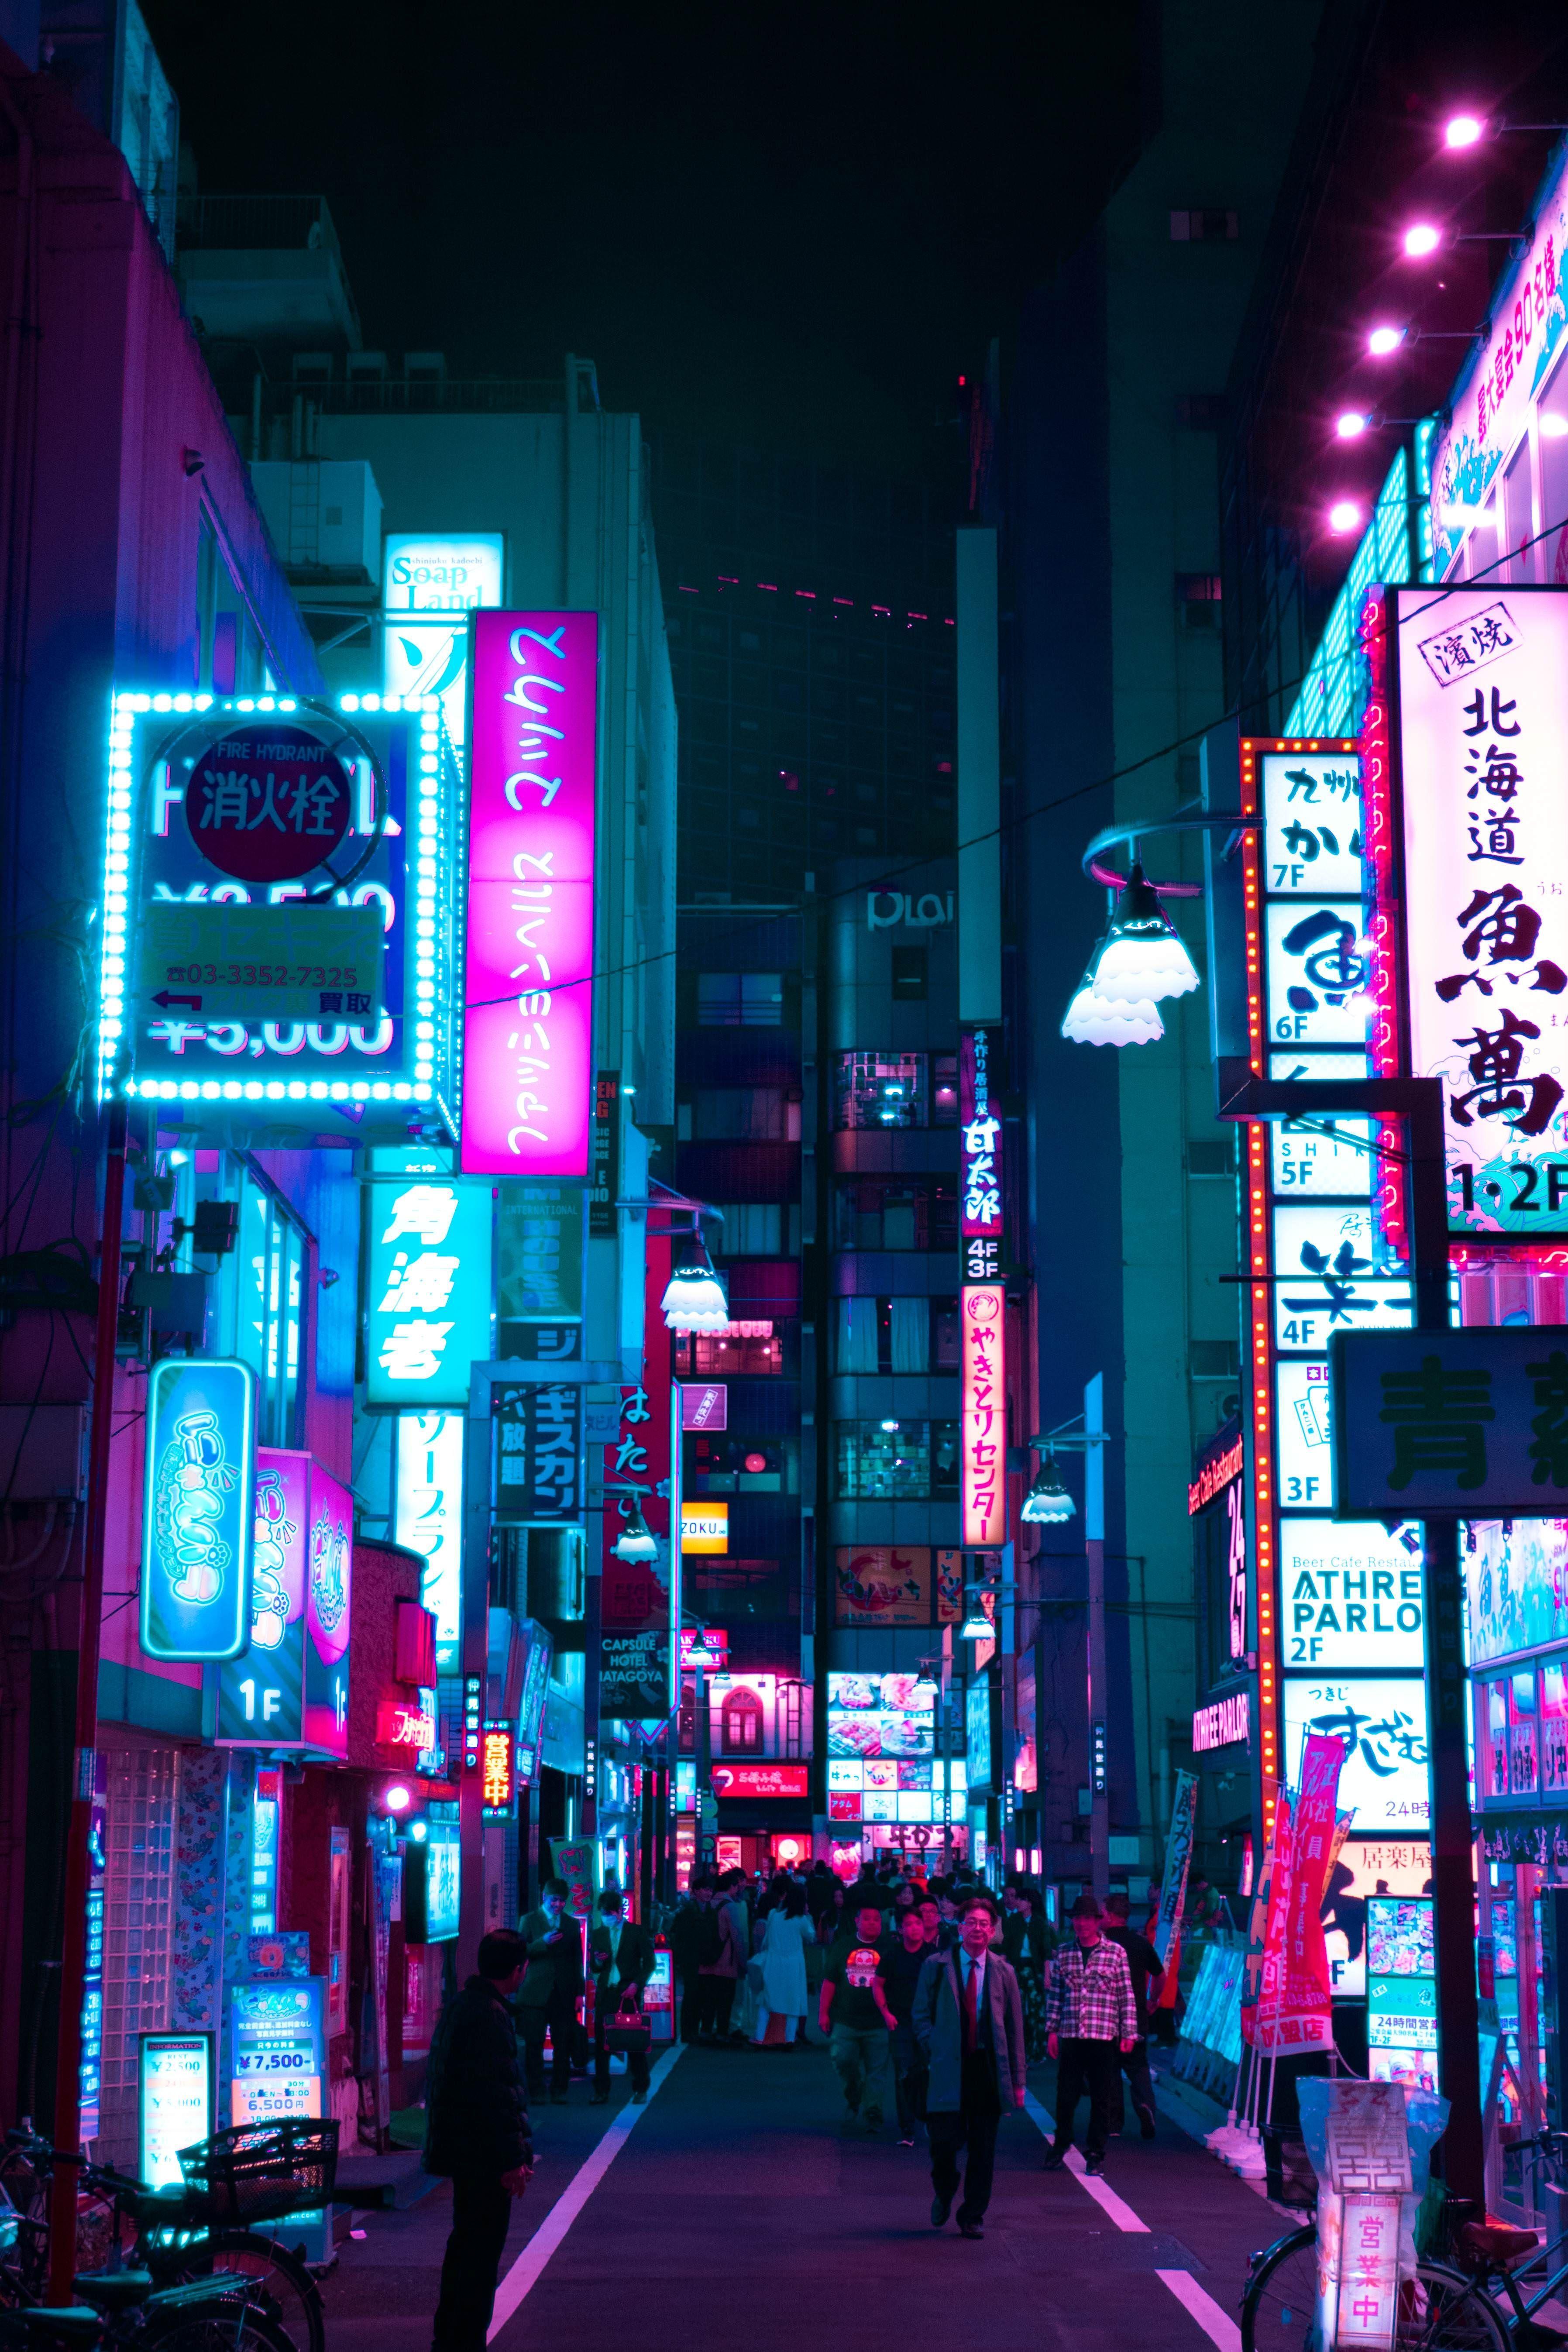 Download wallpaper 800x1200 tokyo japan city night lights iphone 4s4  for parallax hd background